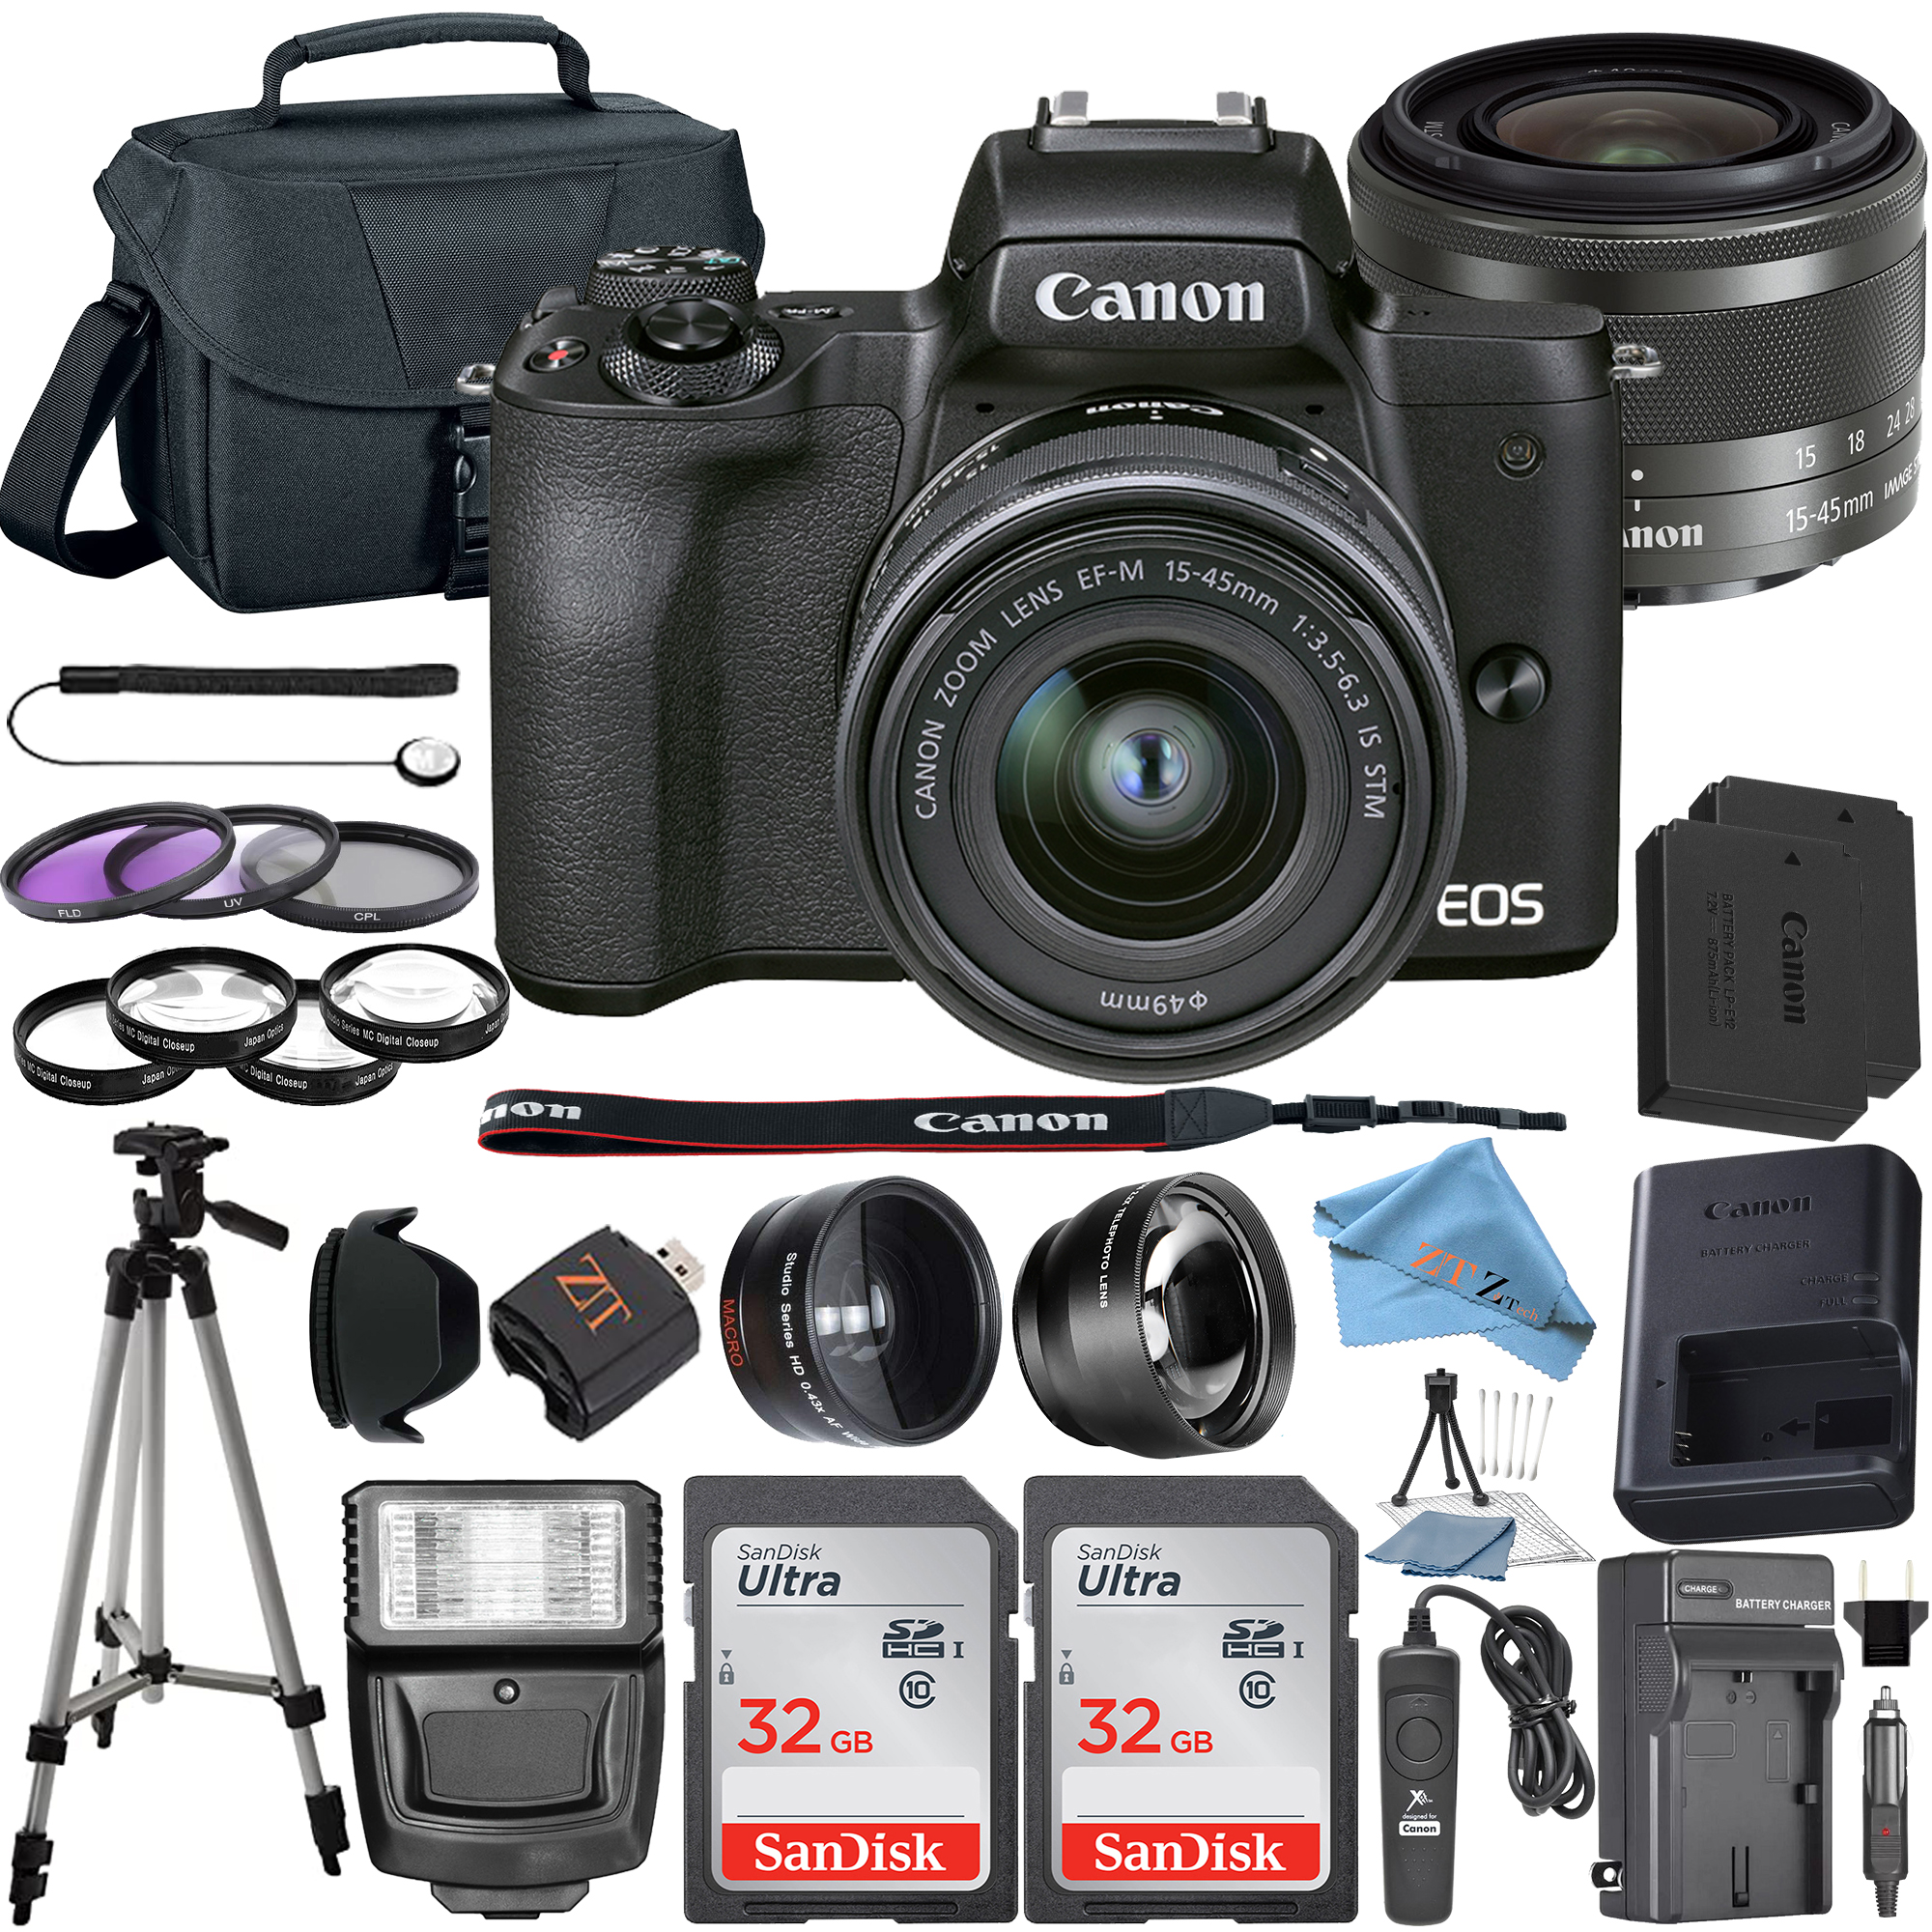 Canon EOS M50 Mark II Mirrorless Camera Bundle with 15-45mm Lens, SanDisk 32GB SanDisk Memory Card, Case, Wideangle, ZeeTech Accessory